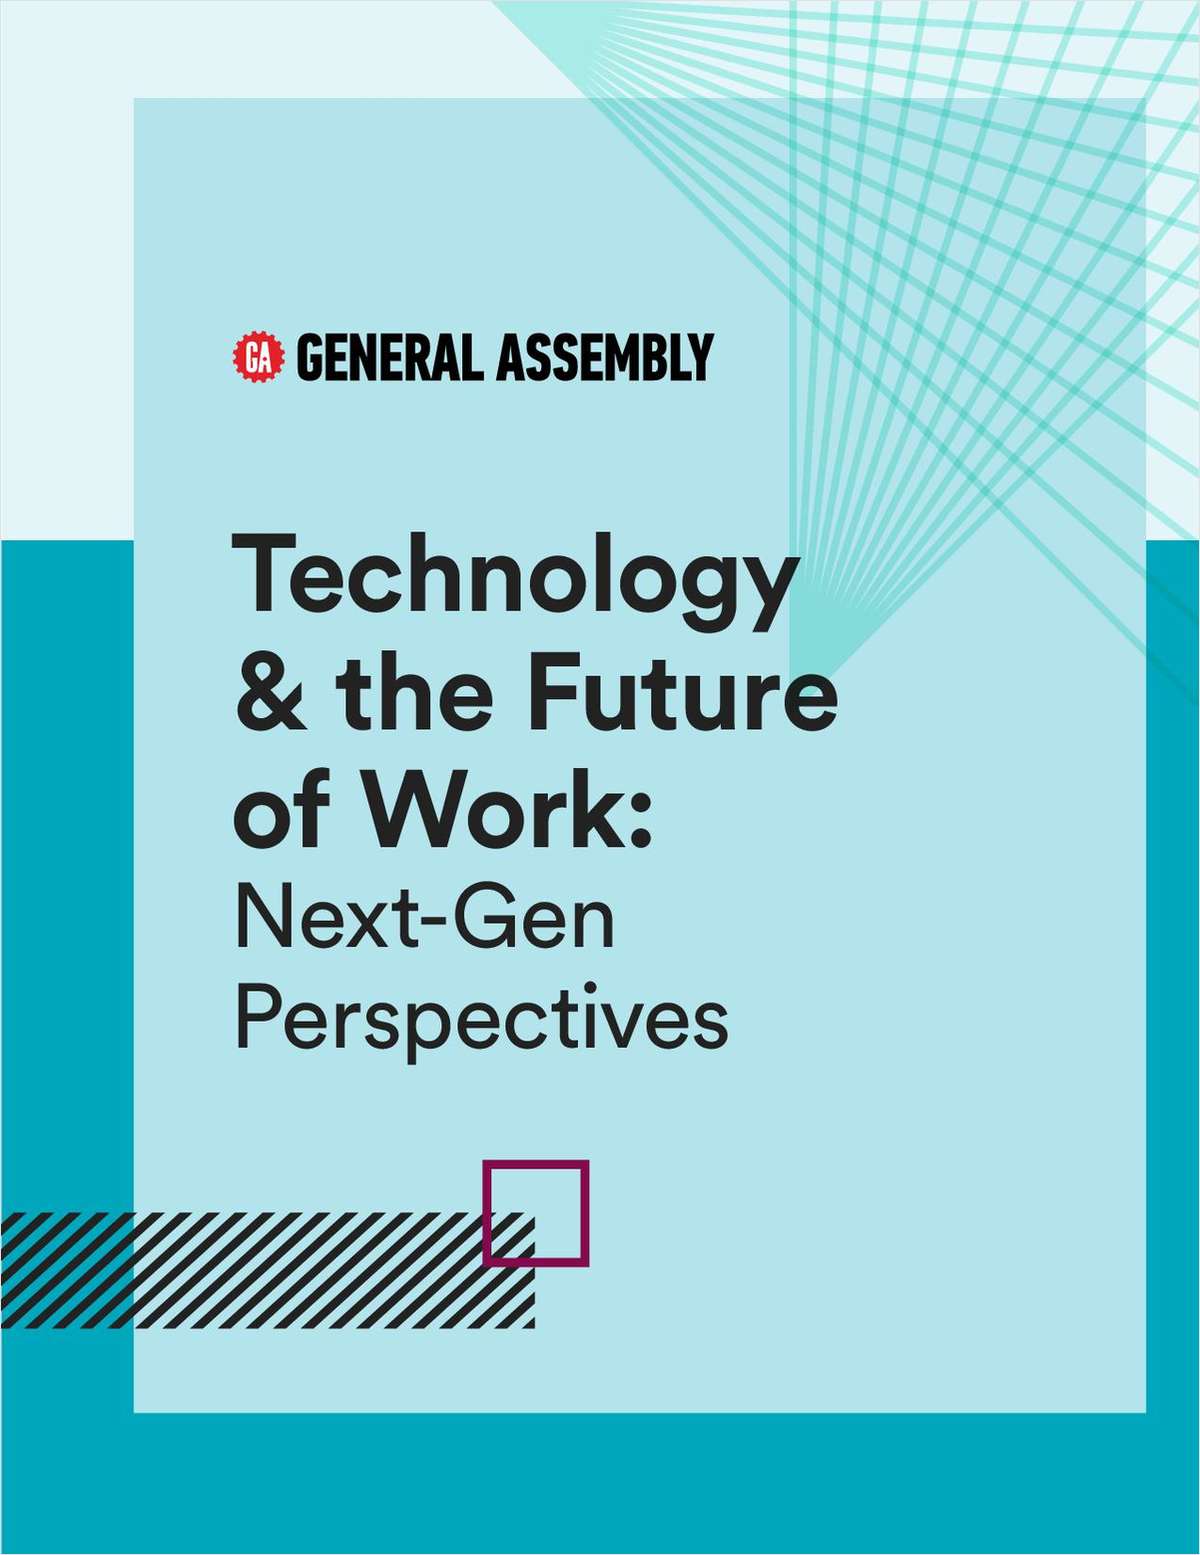 Technology & the Future of Work: Next-Gen Perspectives